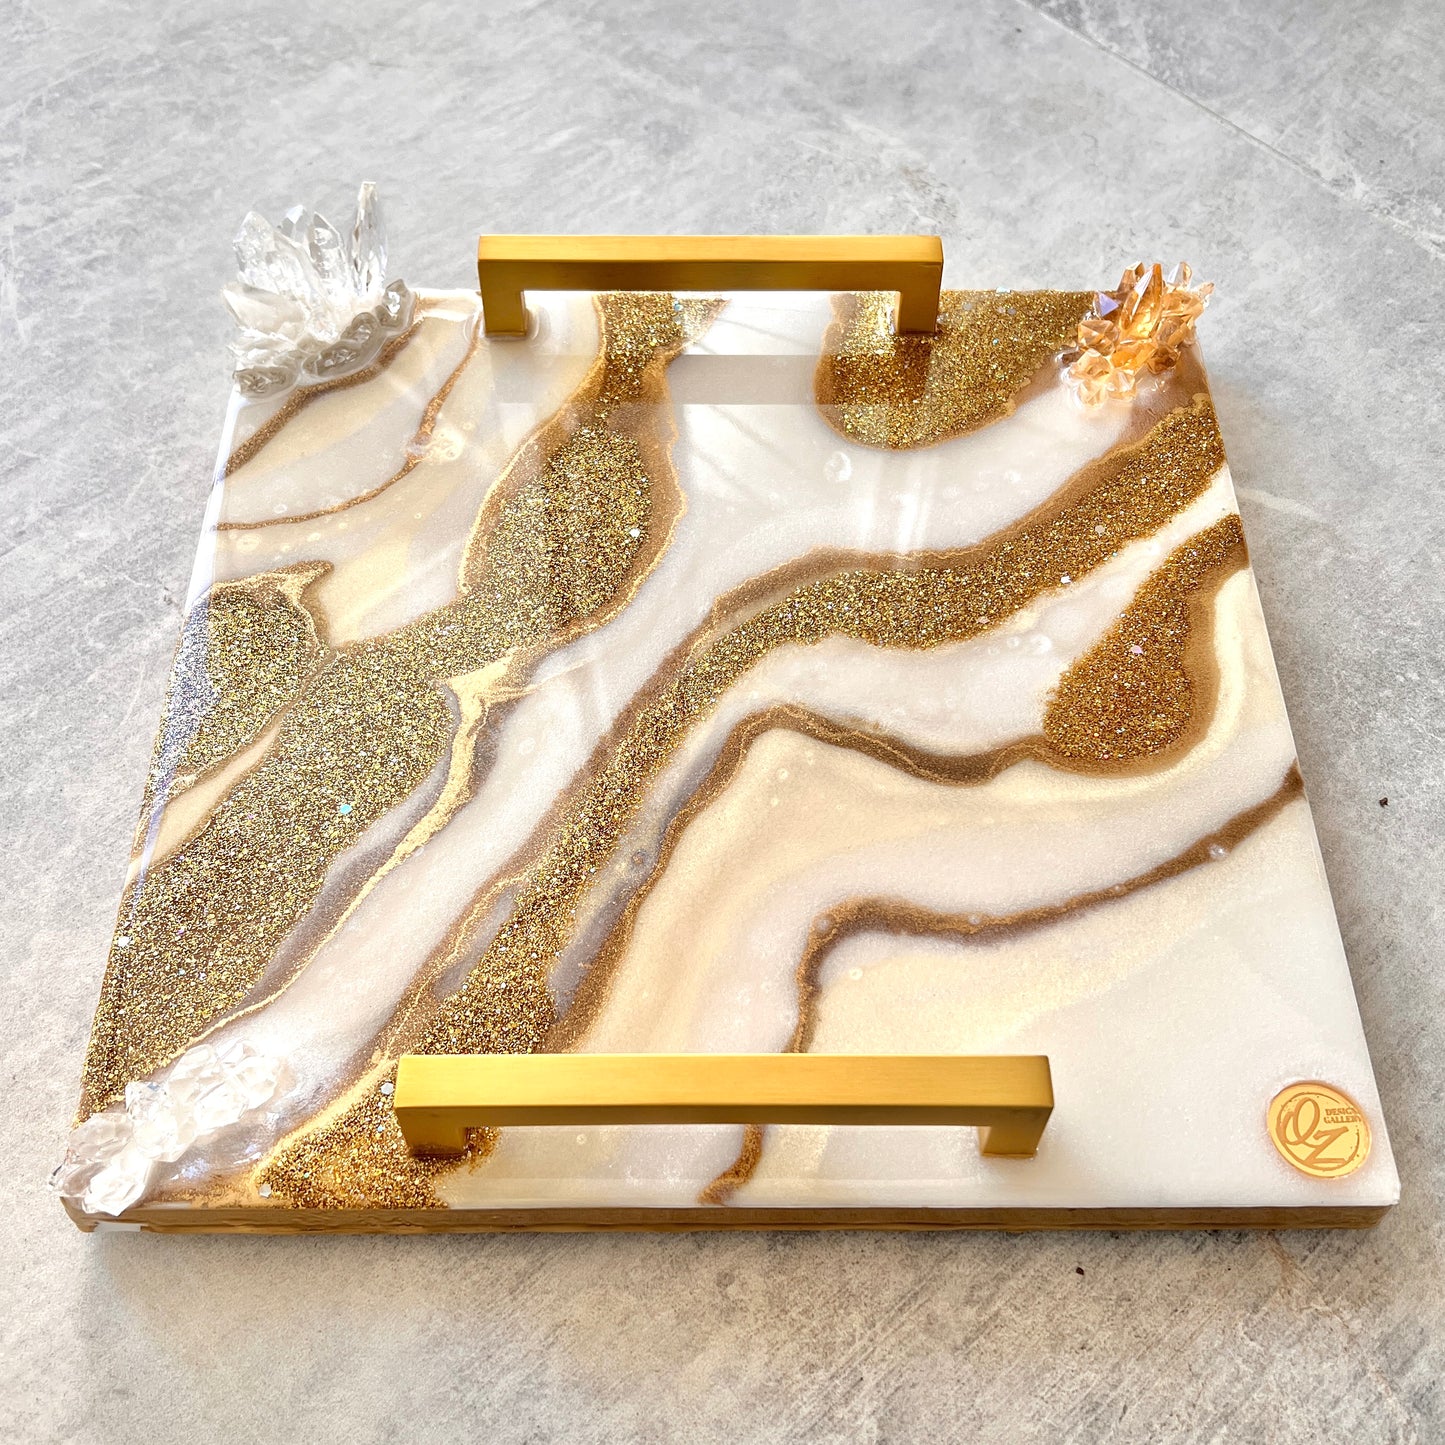 White & Gold Luxury Resin Tray with Handles